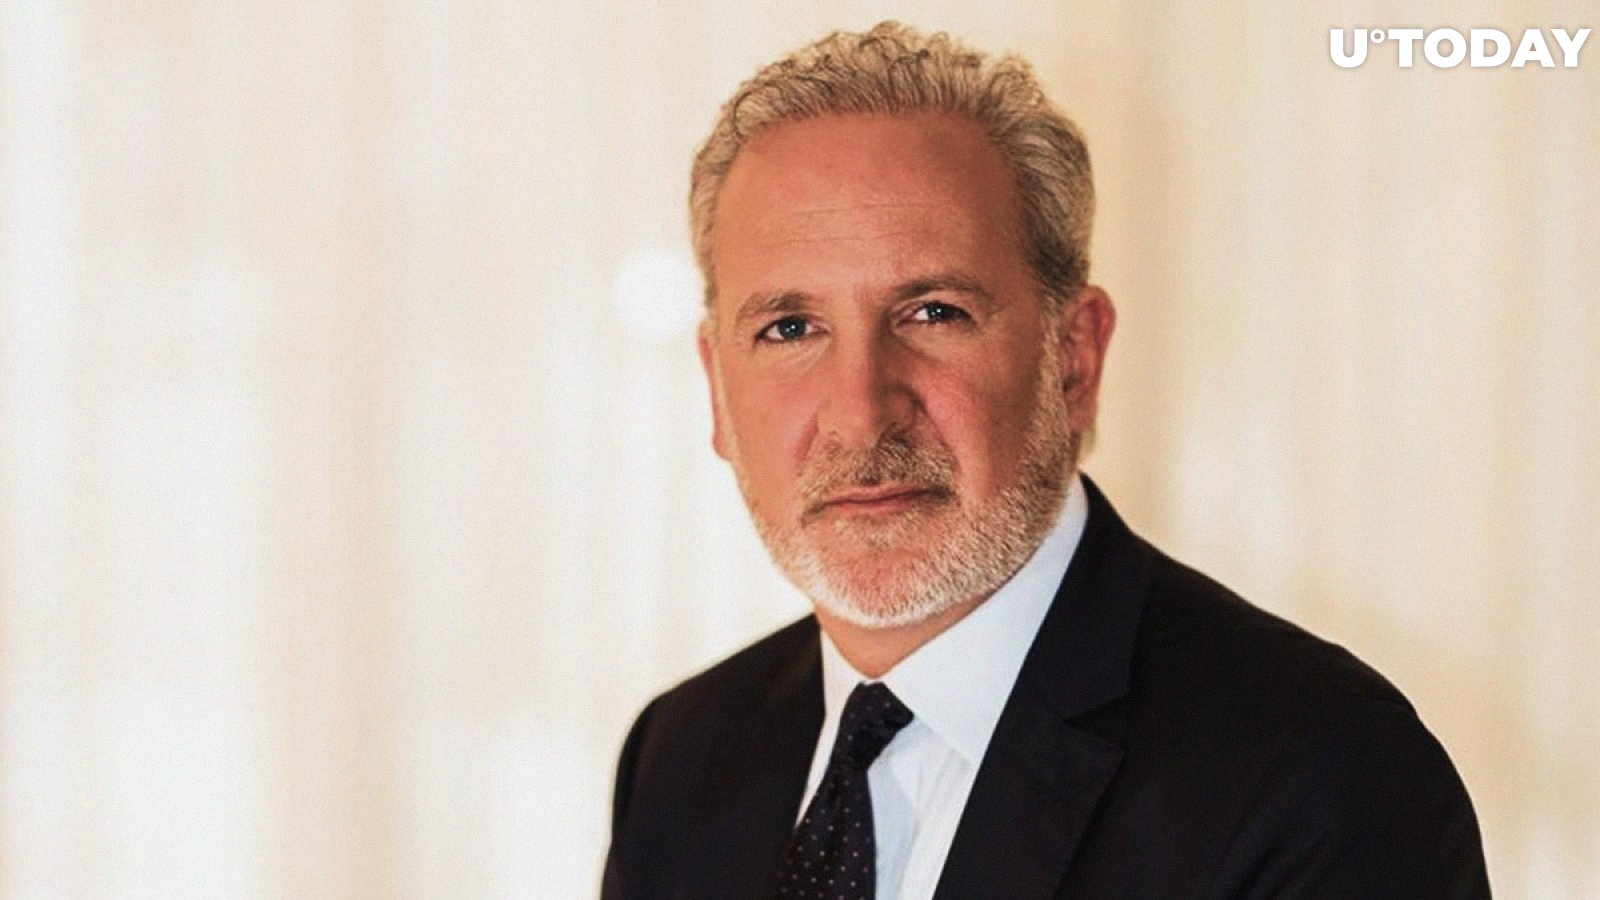 Peter Schiff on Twitter Hack: “I Wonder If This Is a Harbinger of Bitcoin Itself Being Hacked”